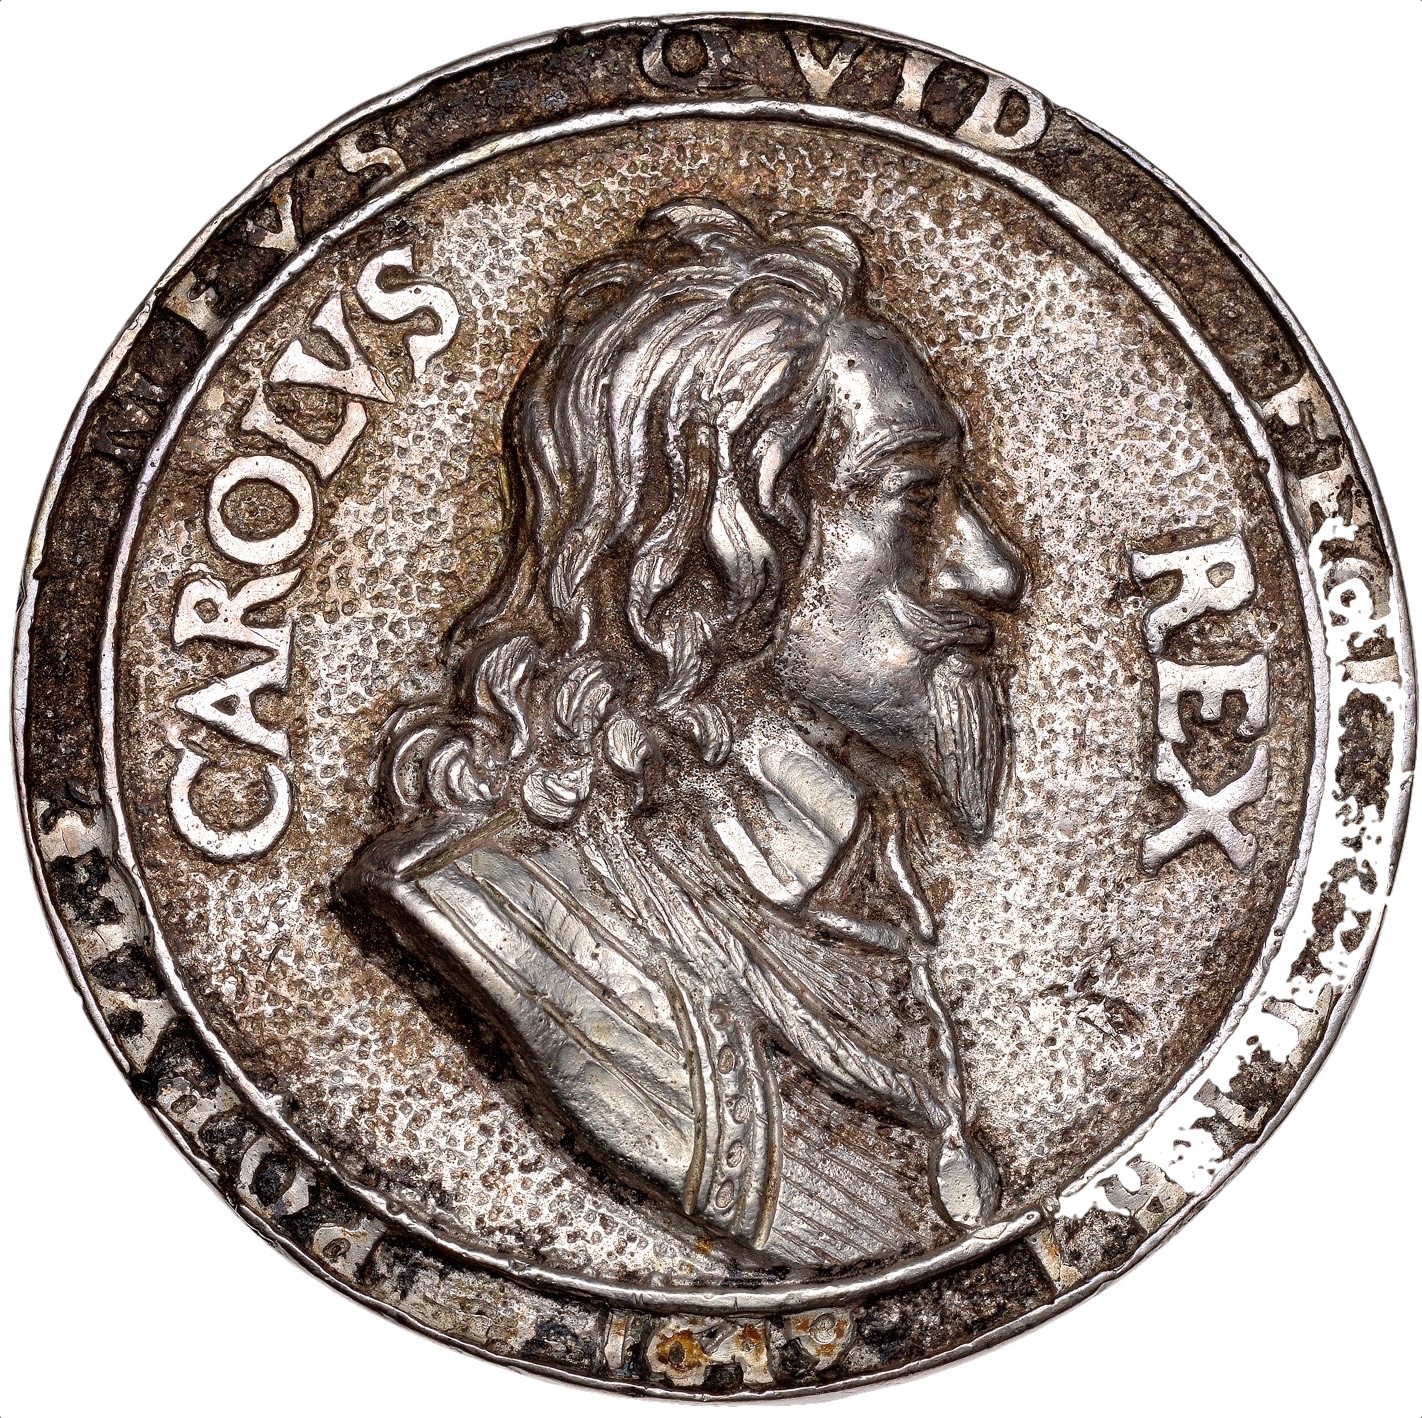 1649 Charles I death and memorial 57mm silver medal MI 349/208 E161 GVF